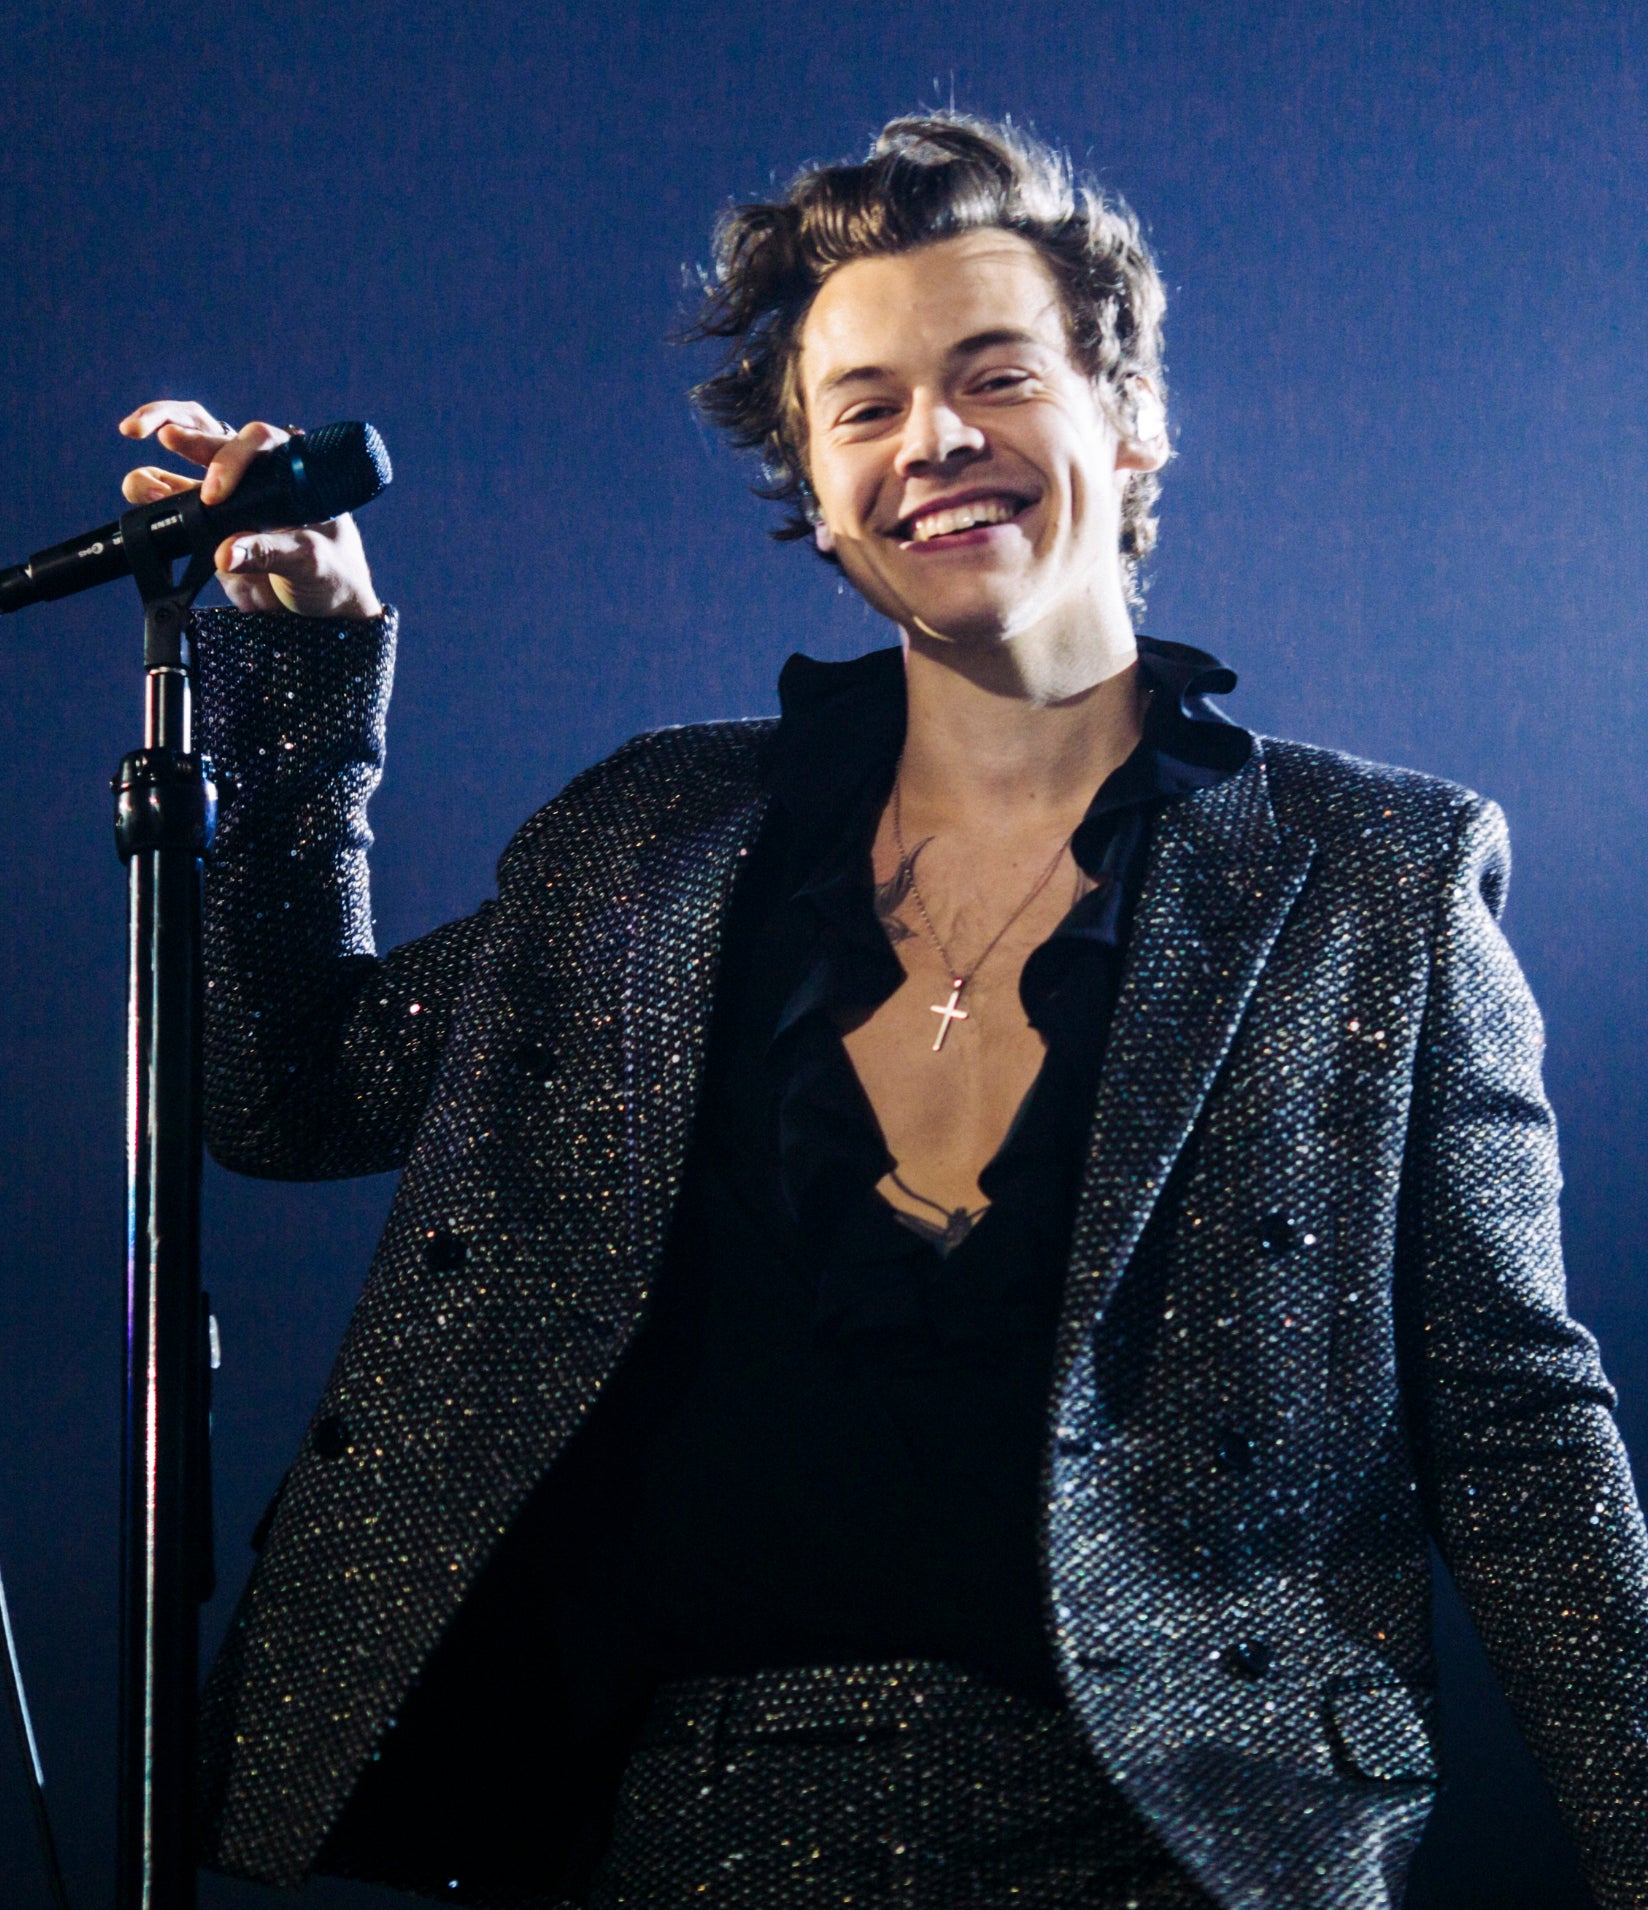 he&#x27;s smiling on stage with a sparkly suit and unruly hair